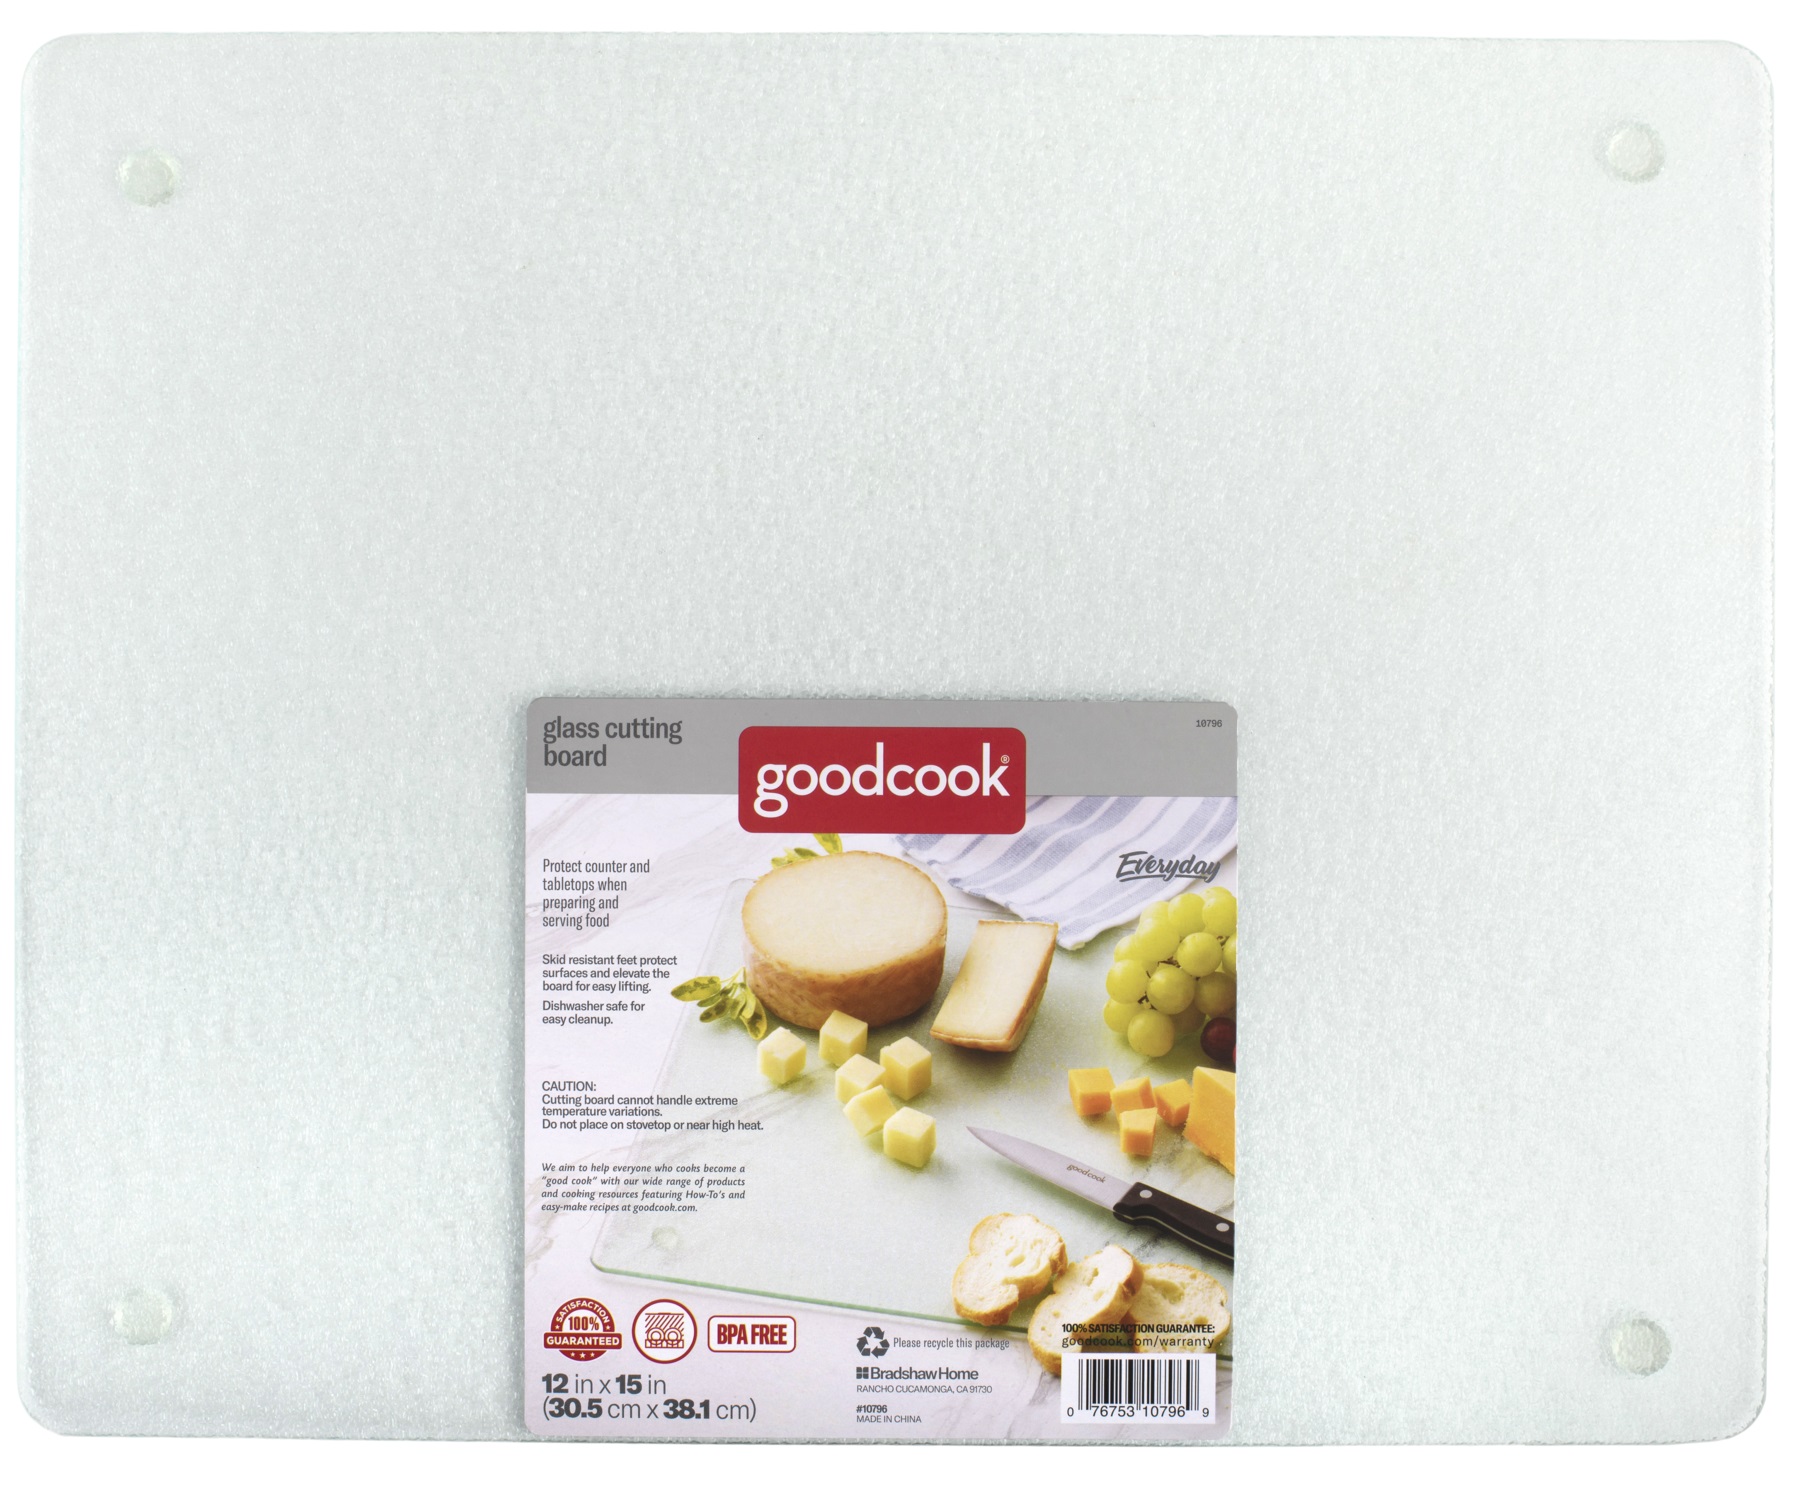 10796_GoodCook_Everyday_Glass Cutting Board 12x15_Packaging 1.psd